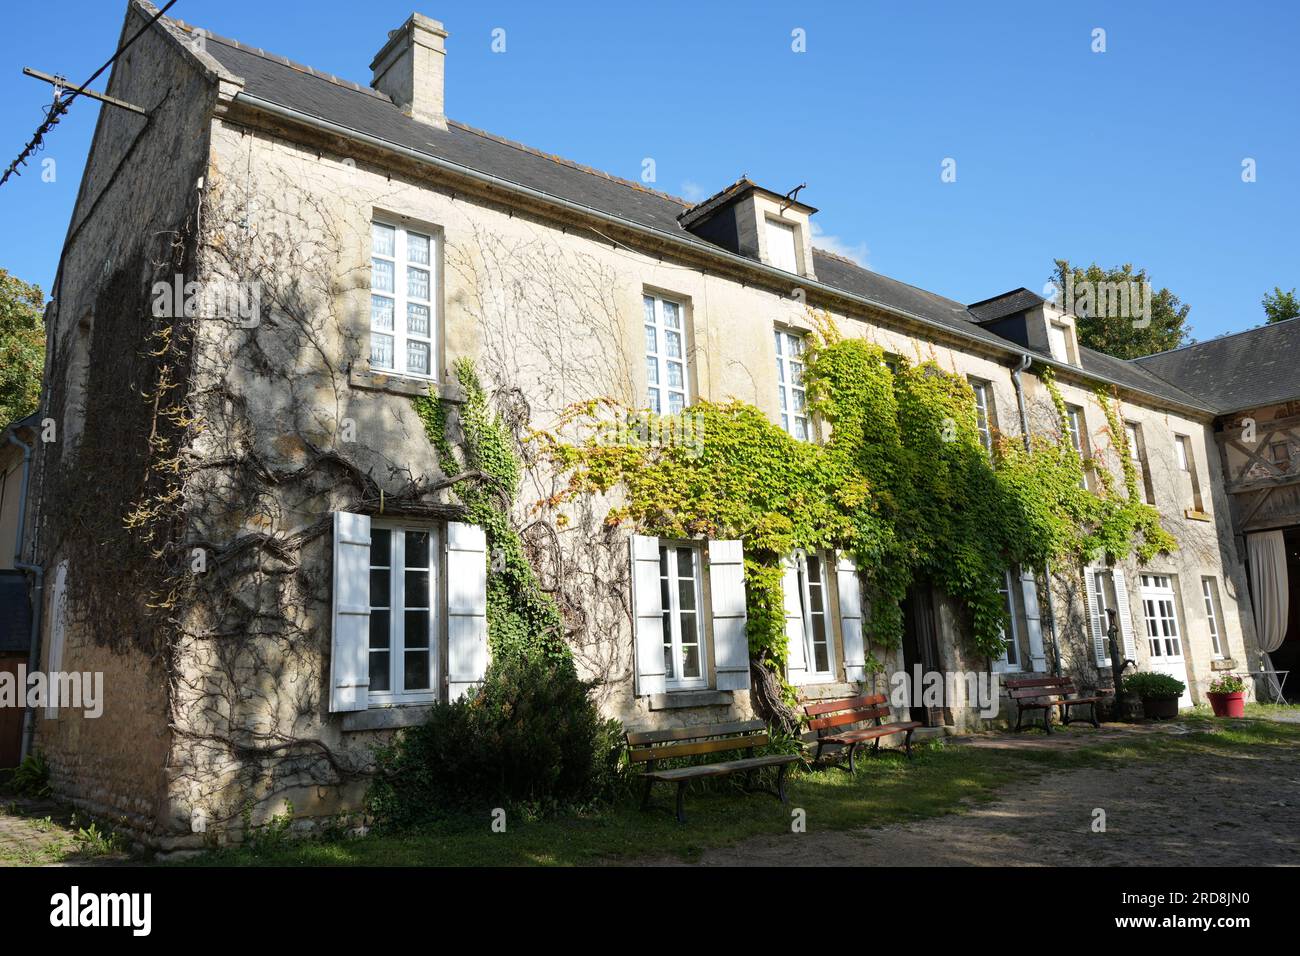 Traditional French Farmhouse at The Vergers de Ducy cider house, Lieu Moussard,Audrieu, France. Stock Photo